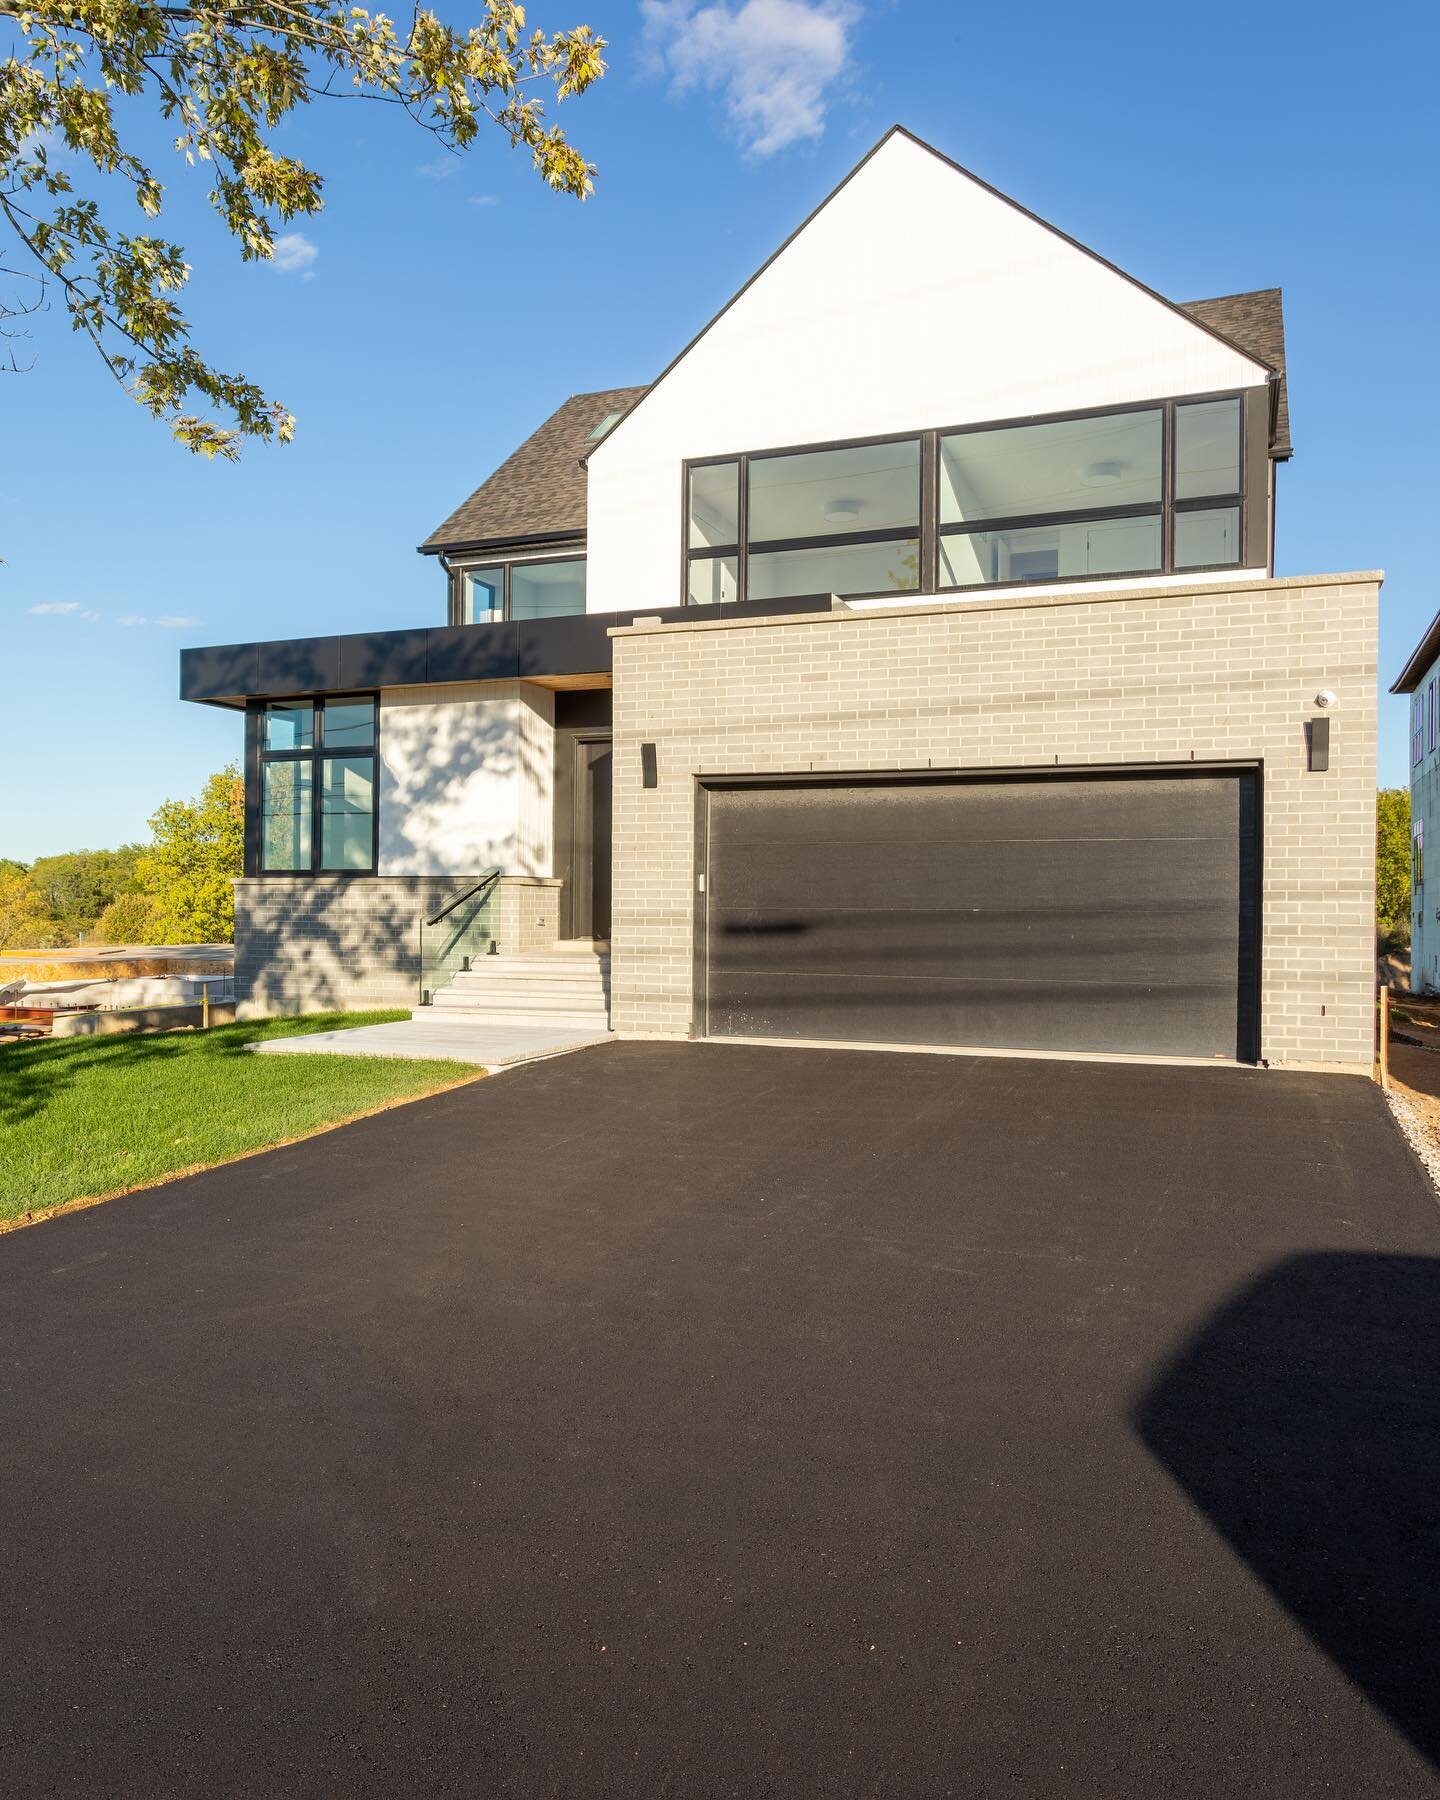 A few of our favourite exterior shots from one of two exclusive custom builds backing onto Eramosa Karst Conservation Lands on Stoney Creek Mountain! For sale now - dm for details
#infillbuilder #customhomes #moderndesign #hamont